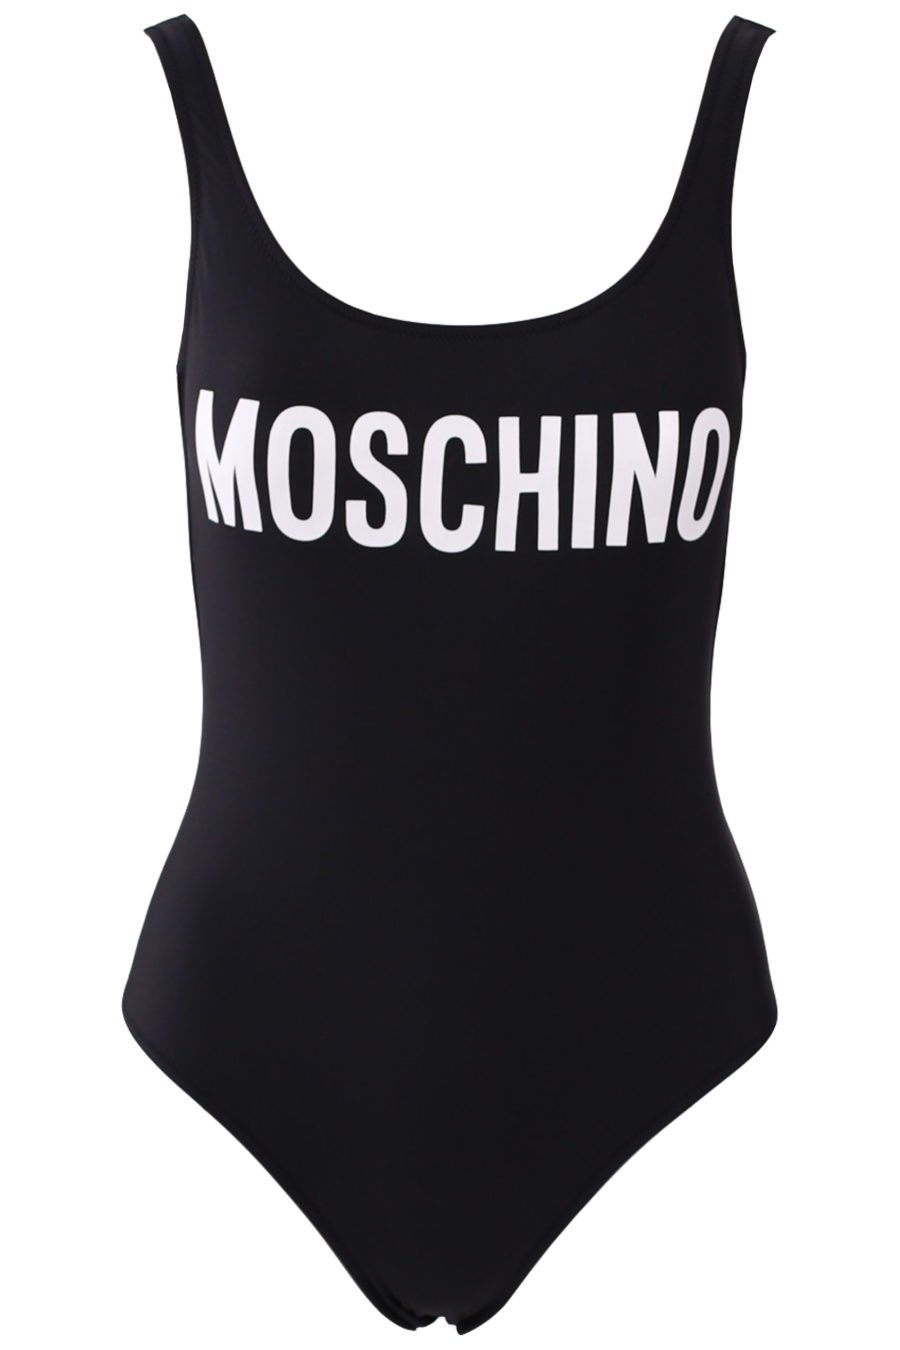 Black one-piece swimming costume with large logo - a758bf83eec8dc2a38a445fdaee327821619e292